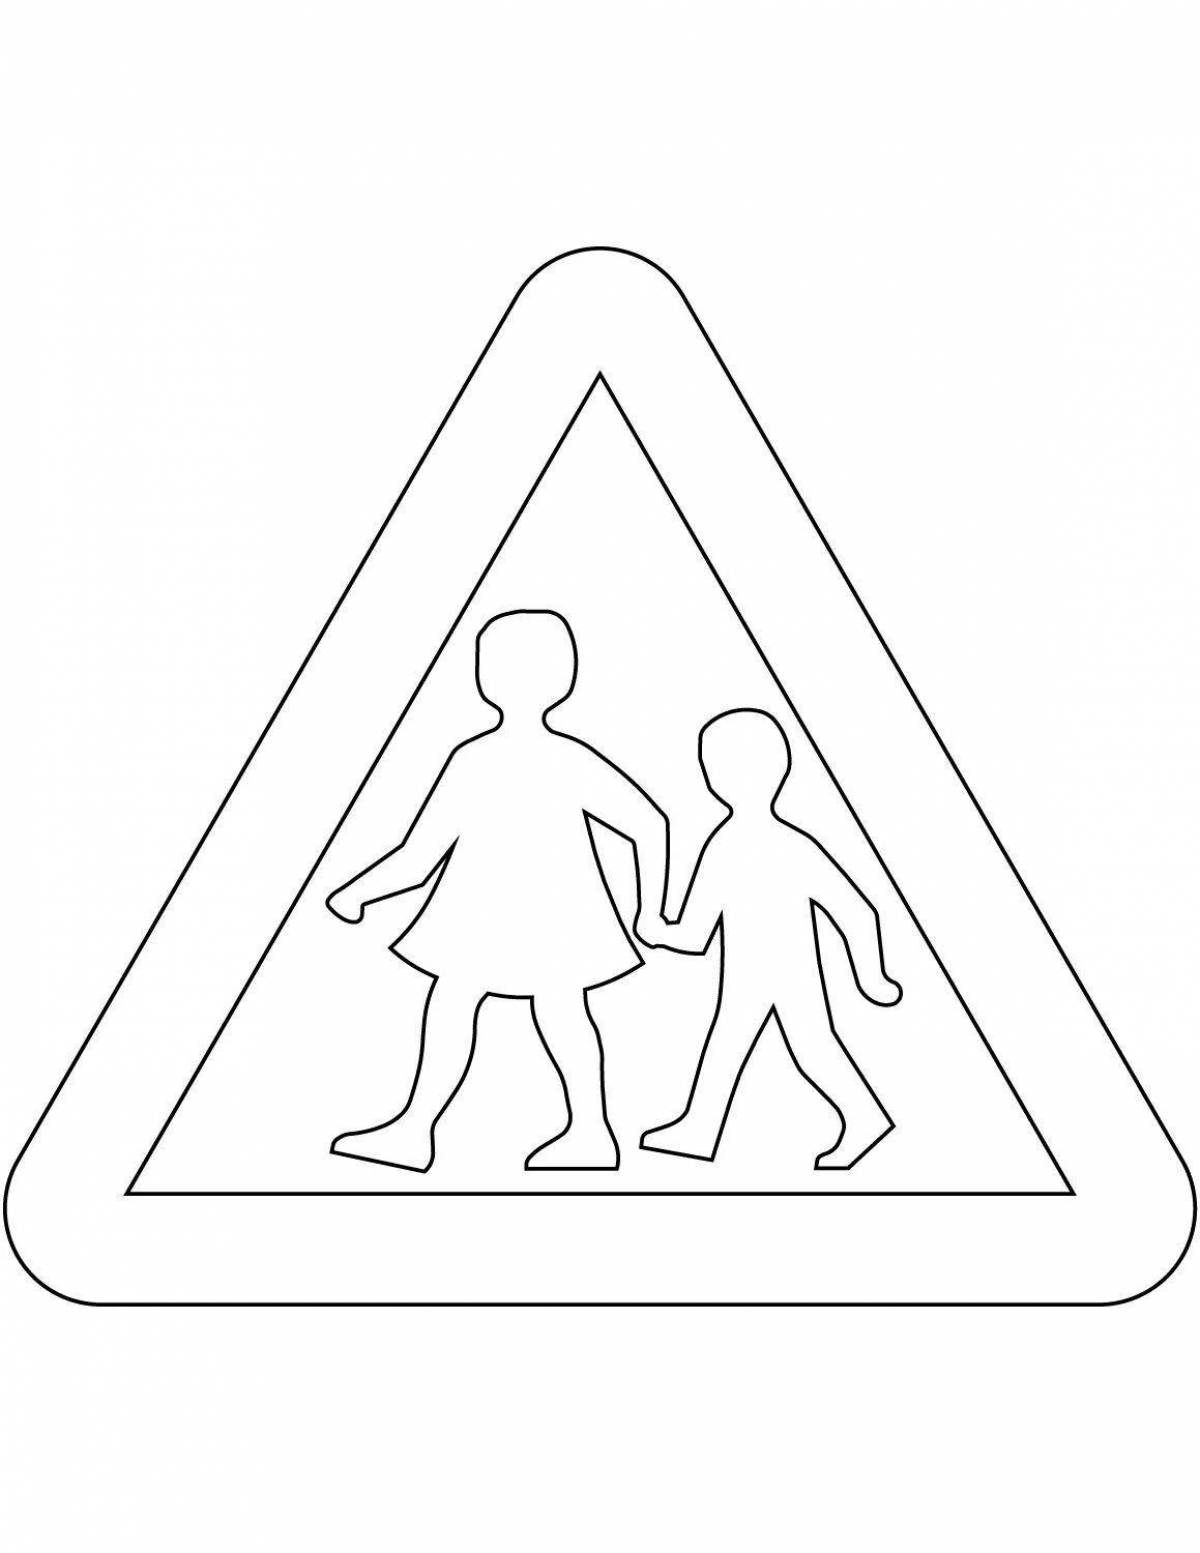 Joyful road signs coloring pages for preschoolers